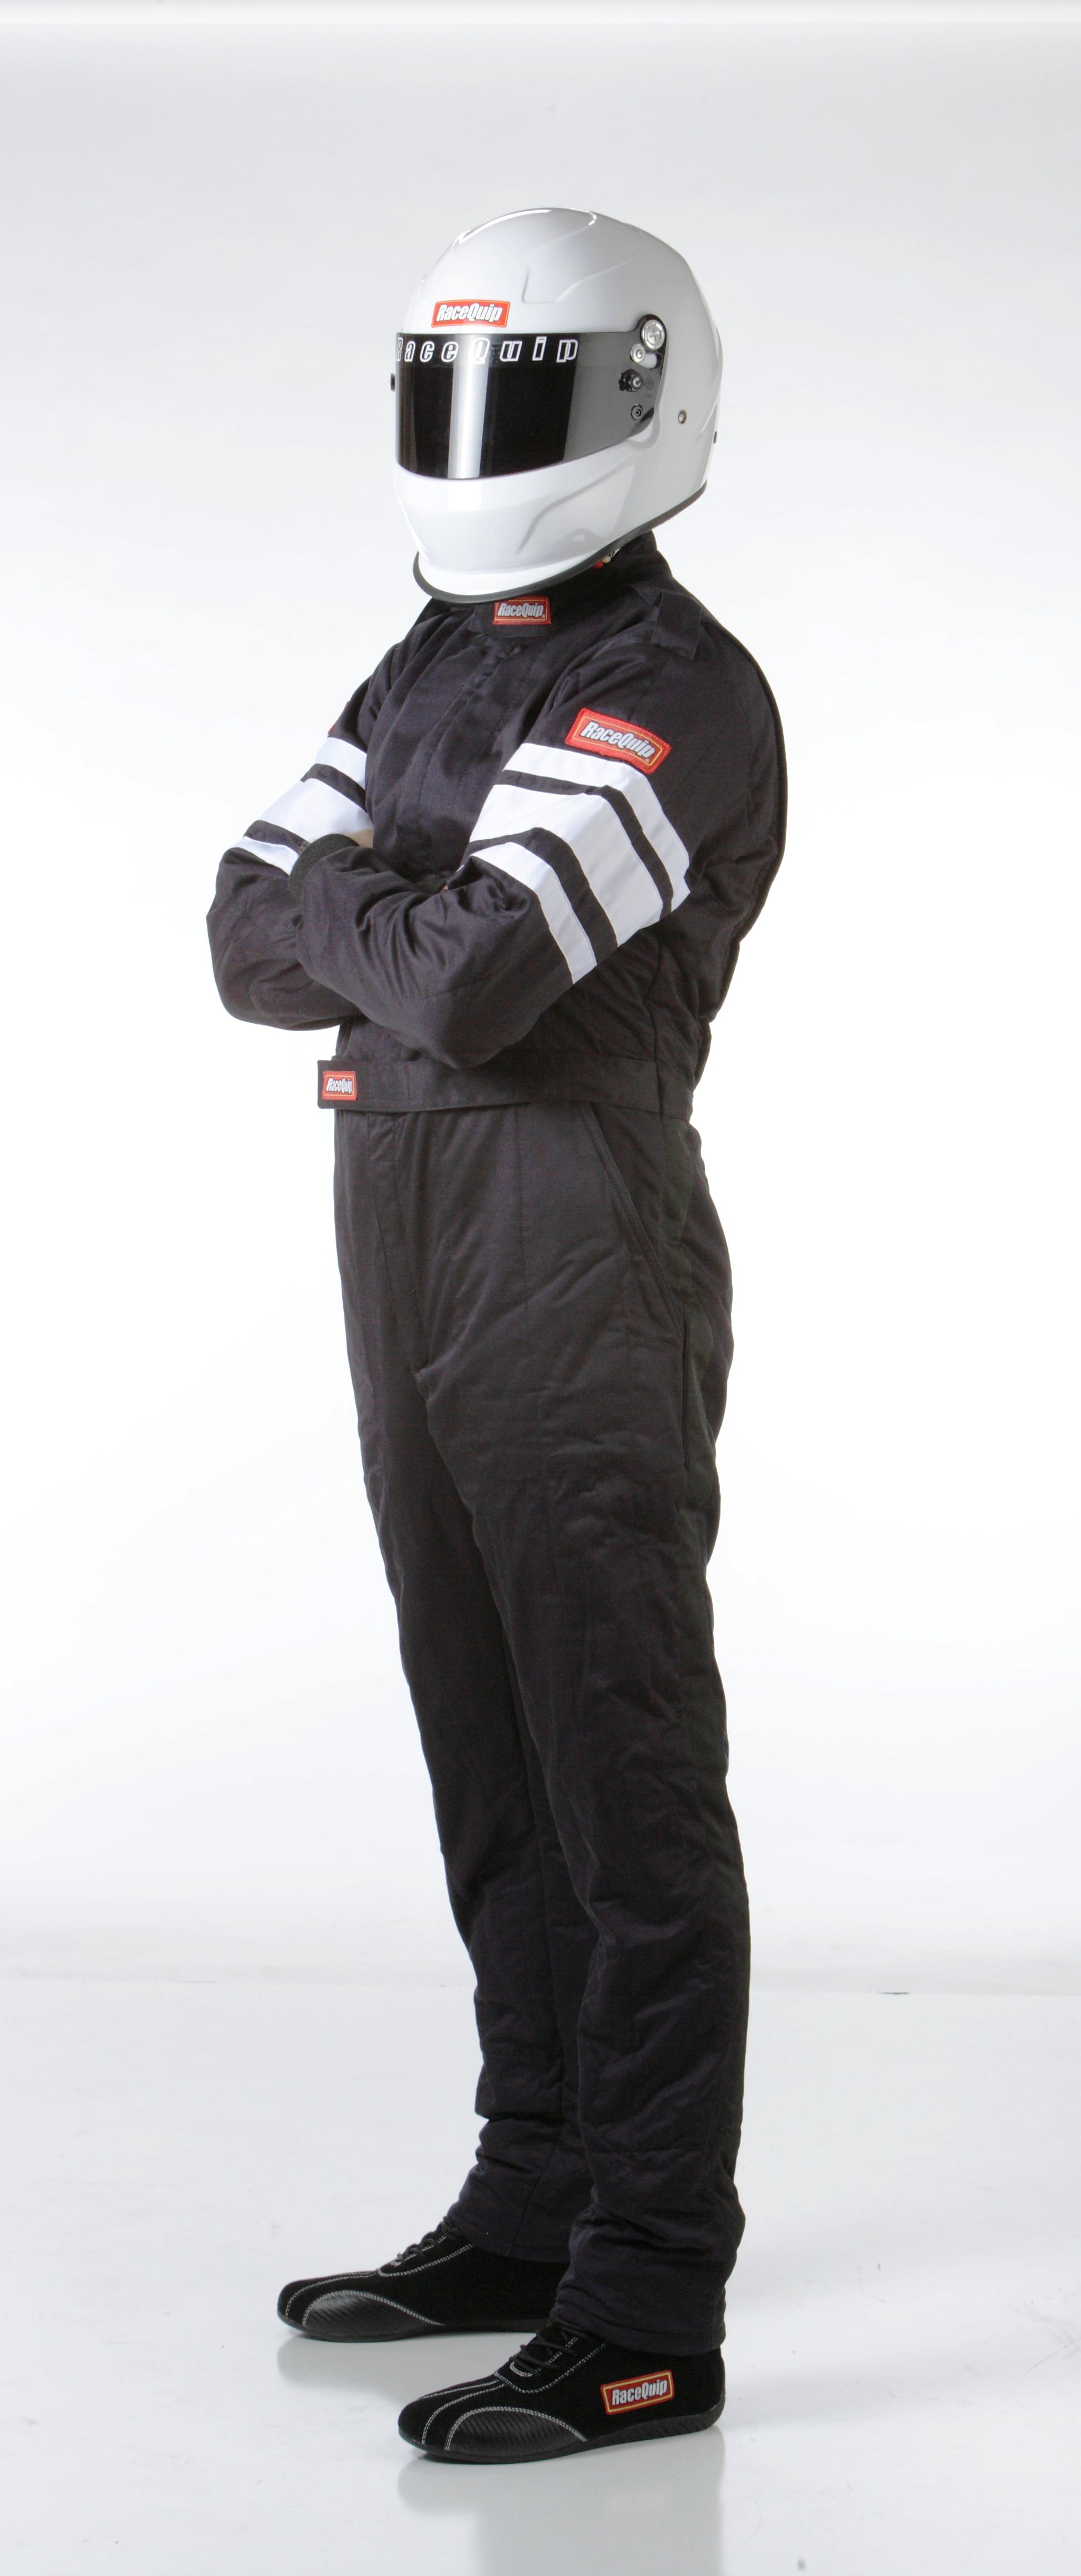 RaceQuip 120008 SFI-5 Pyrovatex One-Piece Multi-Layer Racing Fire Suit (Black, 3X-Large)